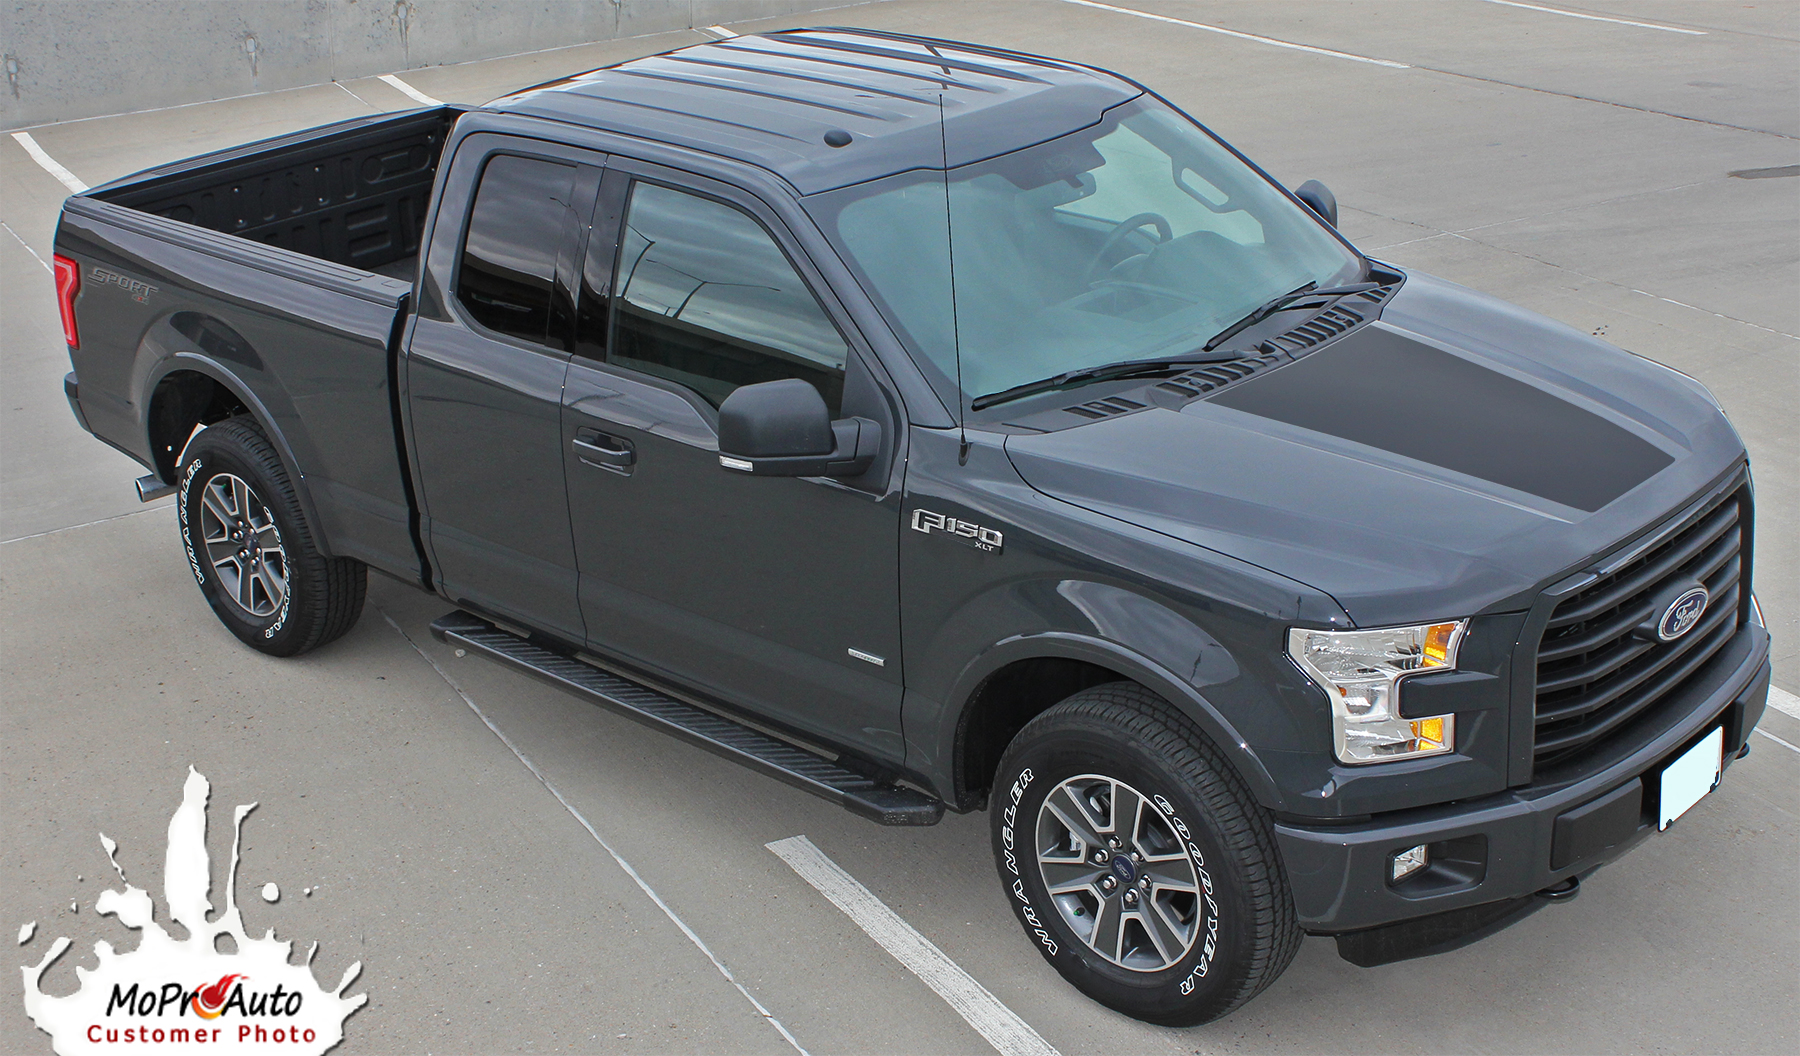 Reaper Hood Solid "Reaper Style" Ford F-Series F-150 Appearance Package Vinyl Graphics and Decals Kit - Customer Photo